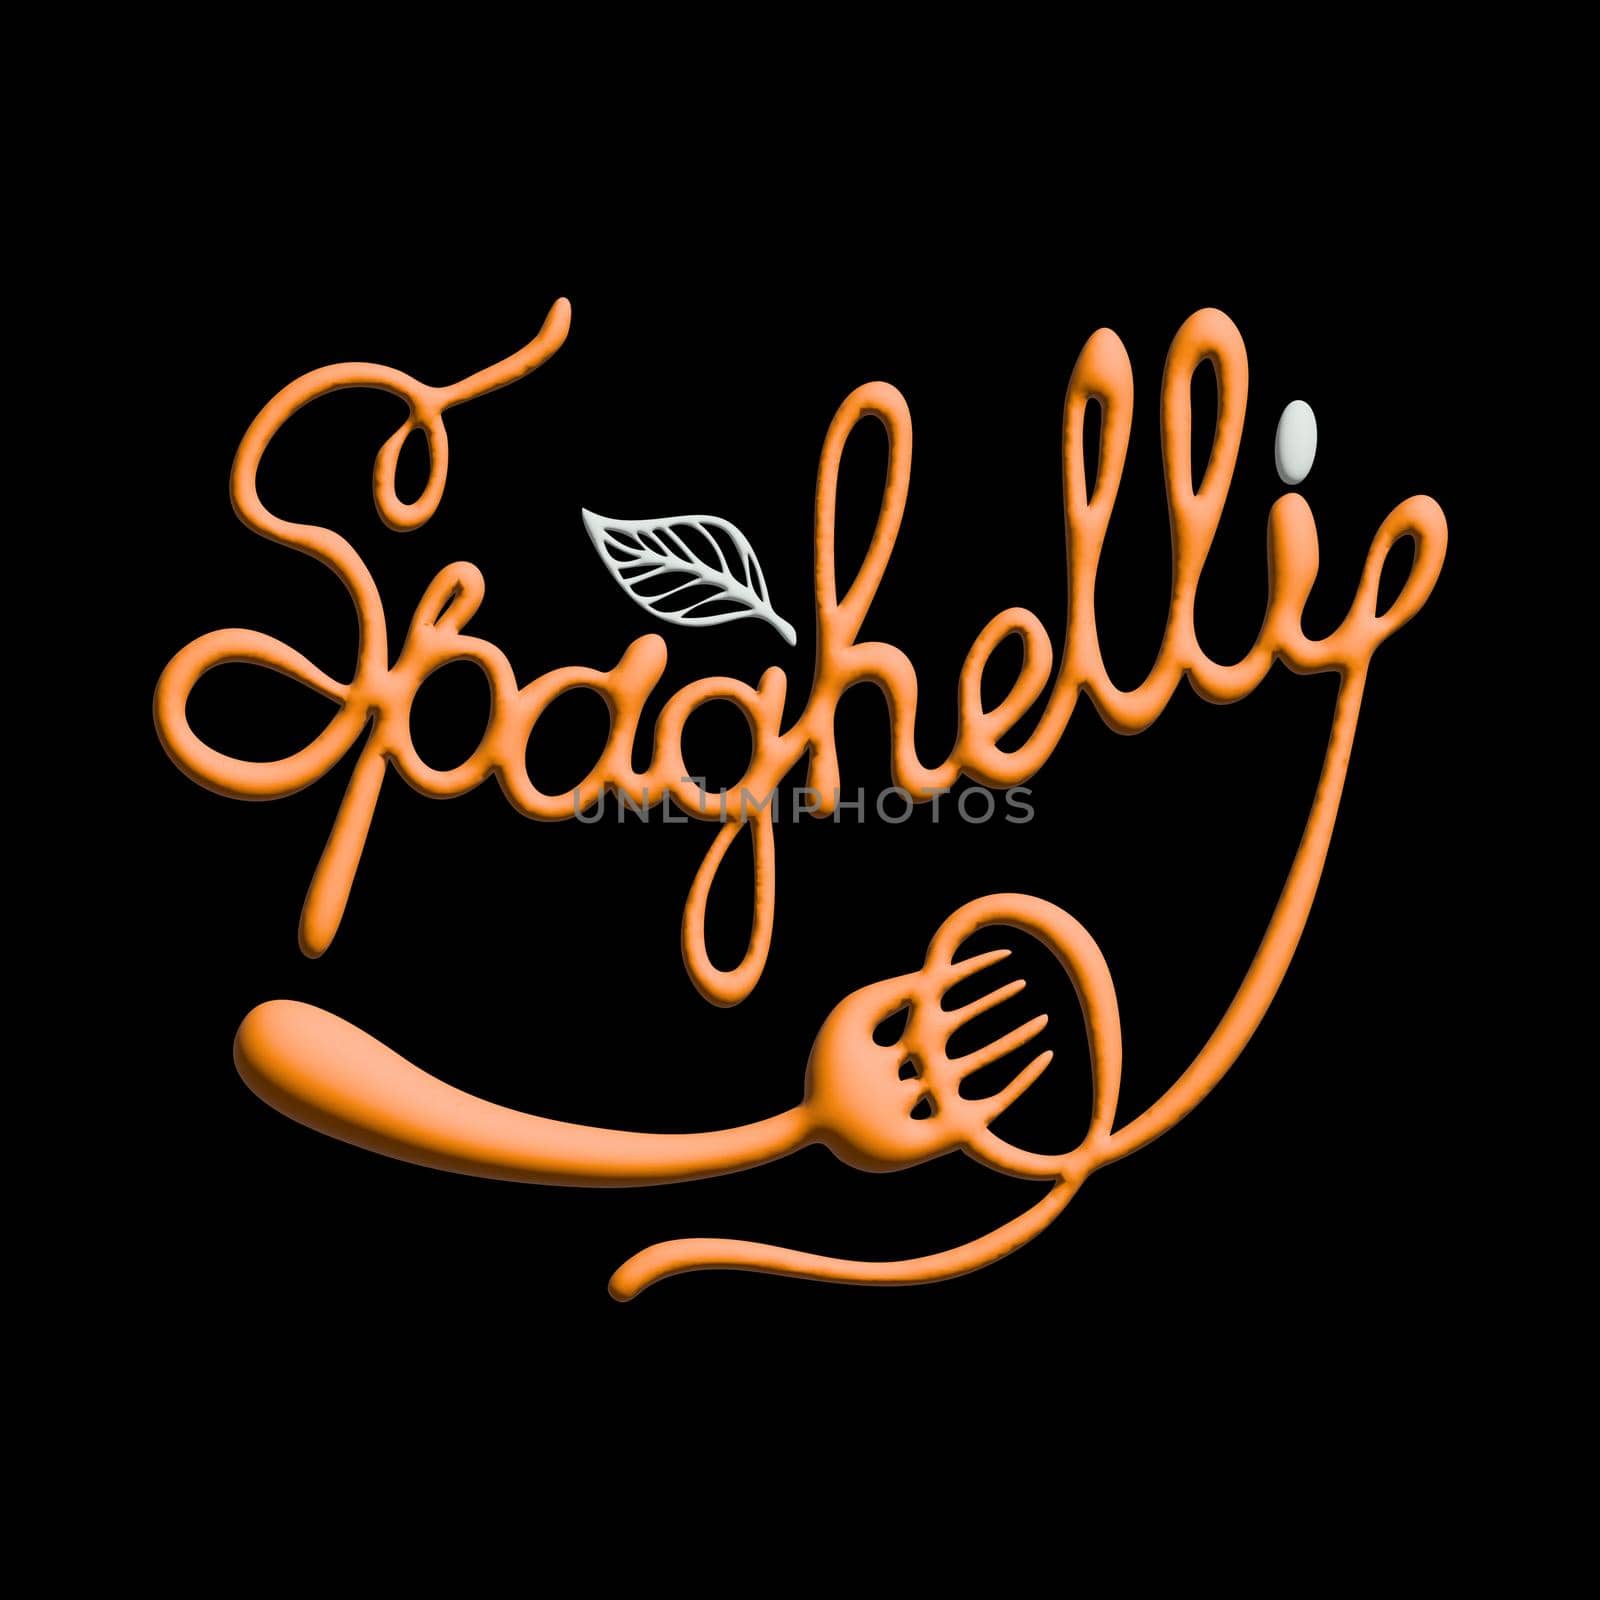 Text stylized written spaghetti. Stylish design for a brand, label or advertisement